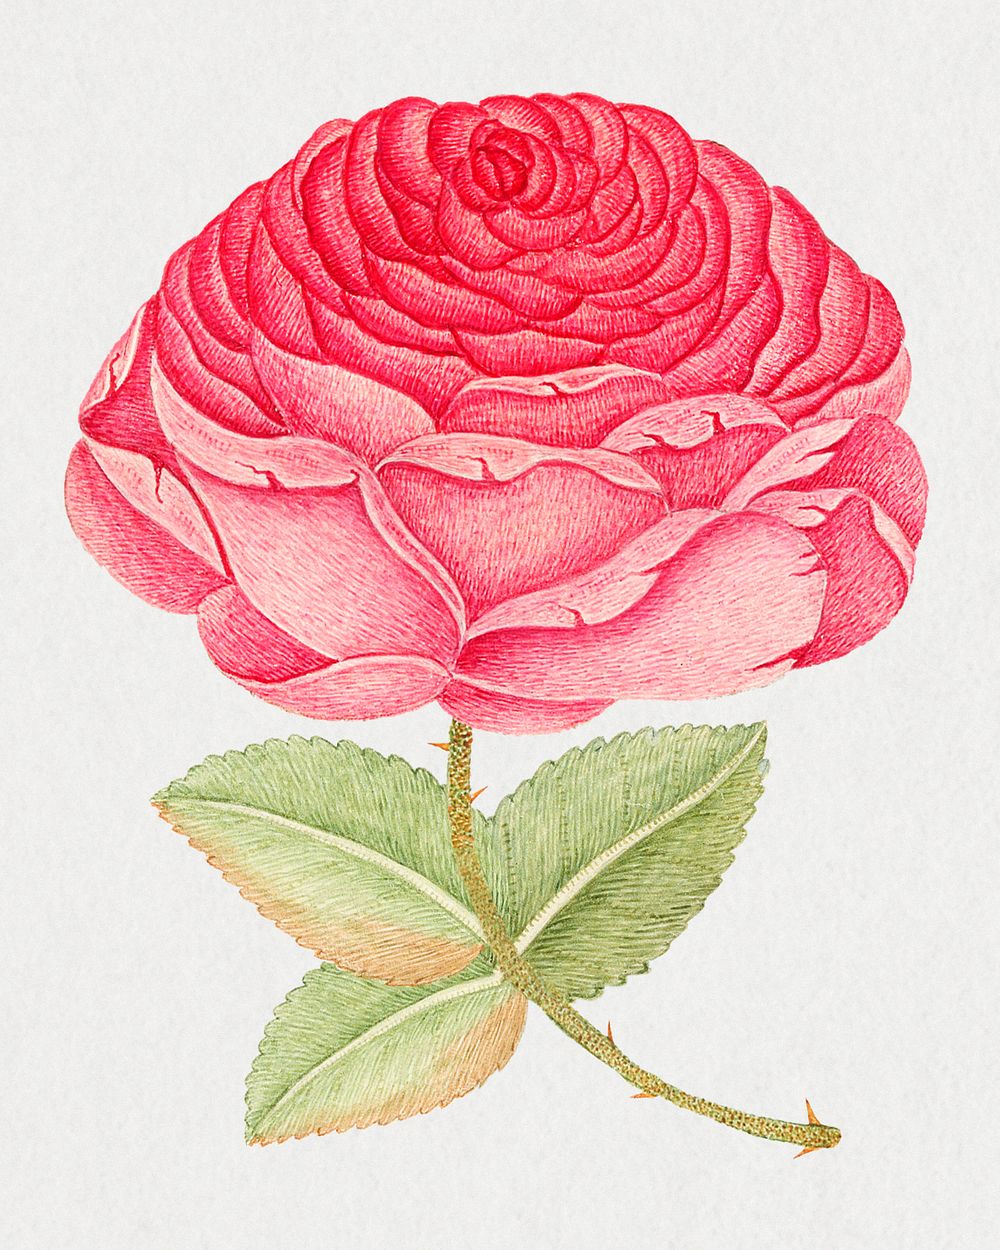 Vintage pink rose illustration, remixed from the 18th-century artworks from the Smithsonian archive.